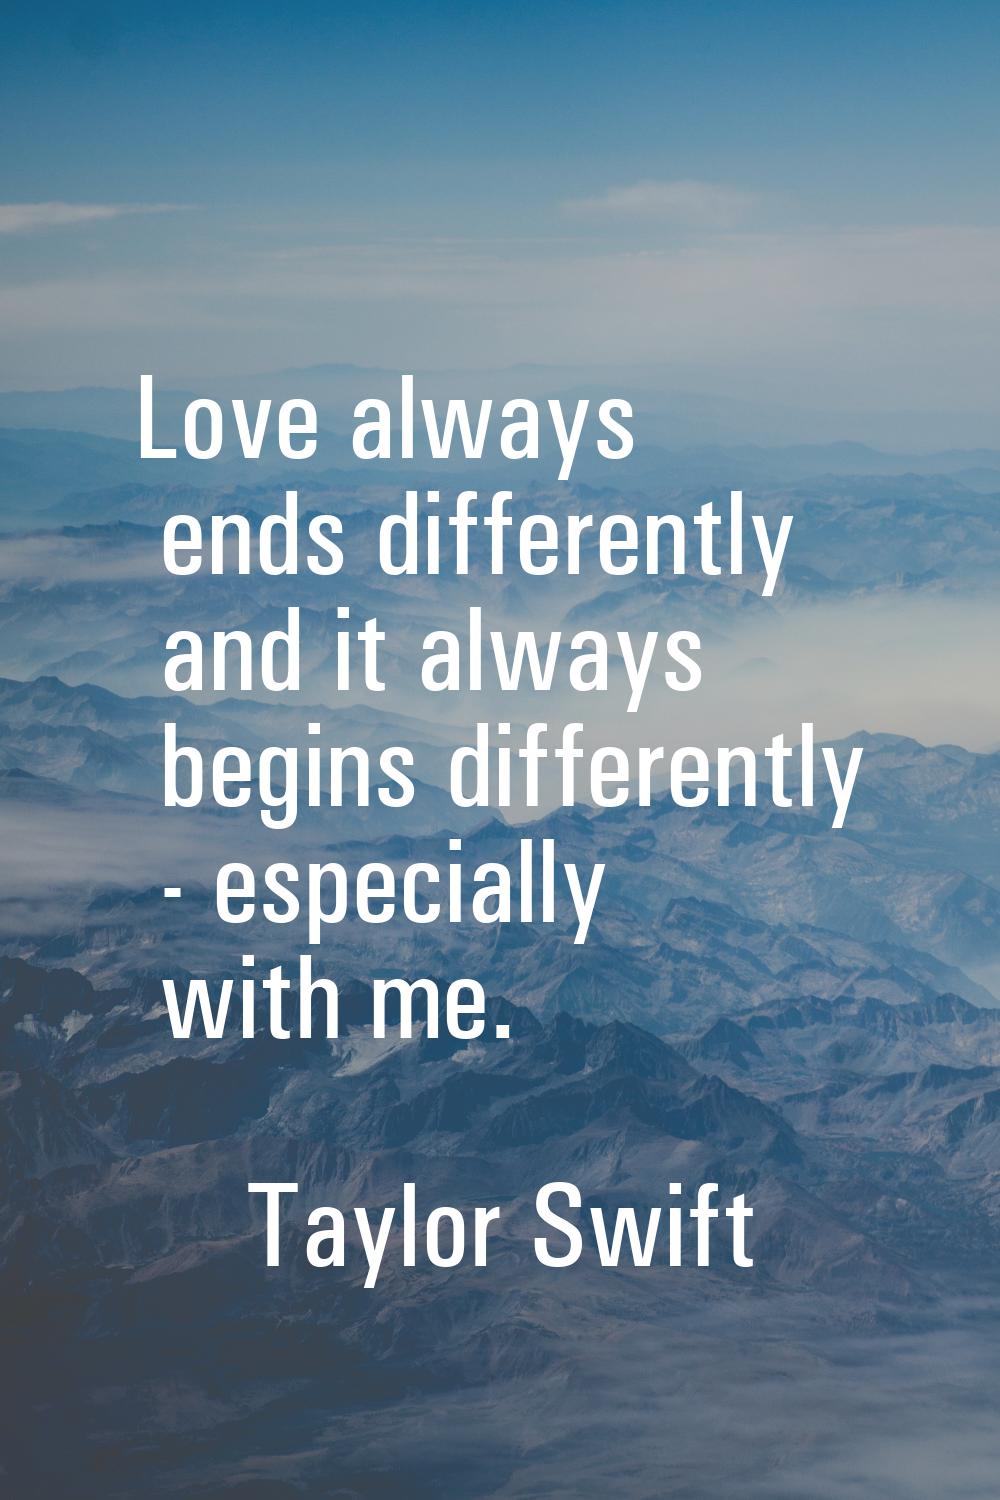 Love always ends differently and it always begins differently - especially with me.